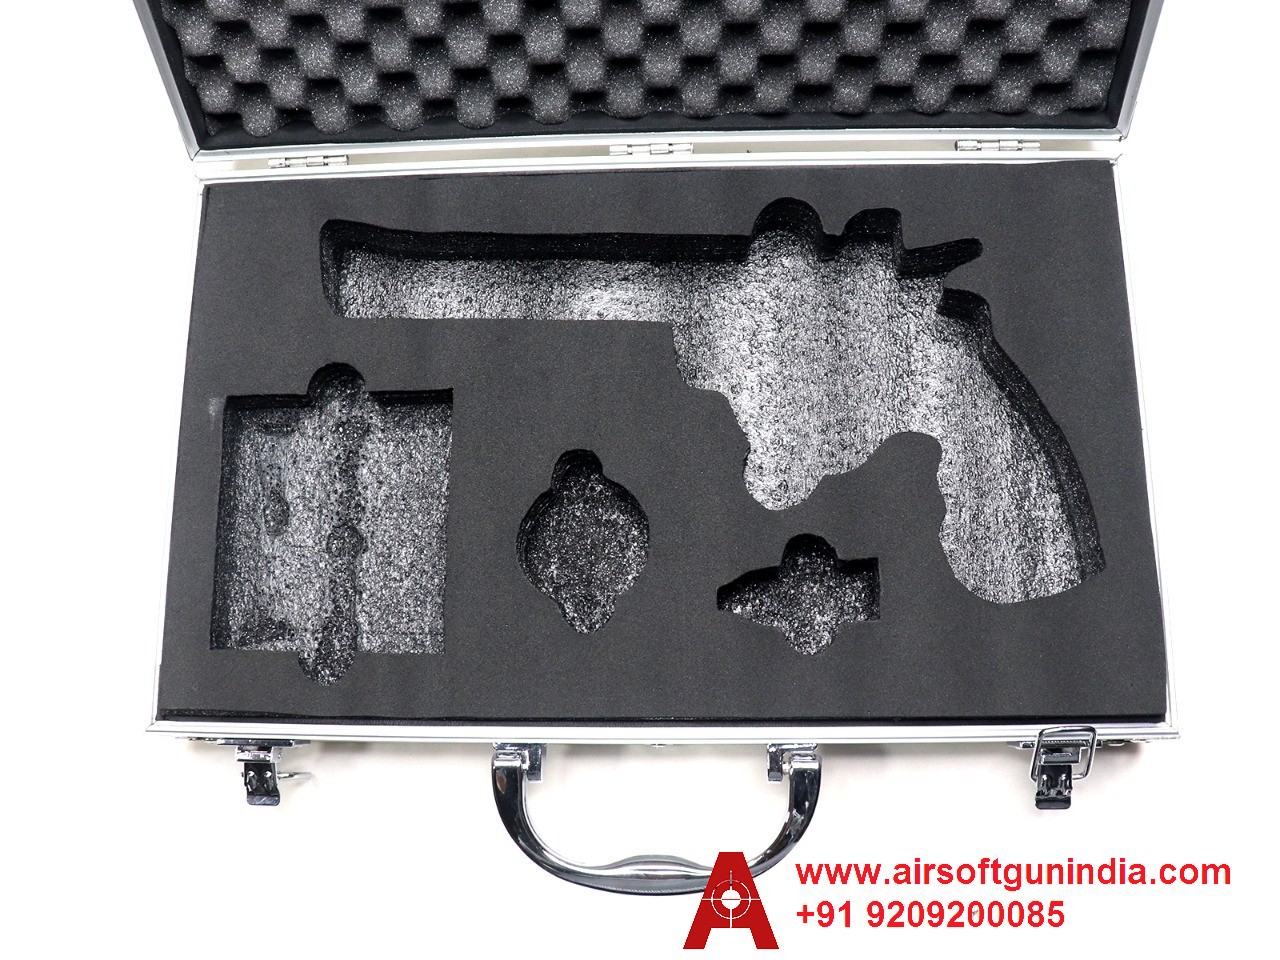 Customized Gun Case For Dan Wesson 6Inch BB Co2 Bb Revolver By Airsoft Gun India